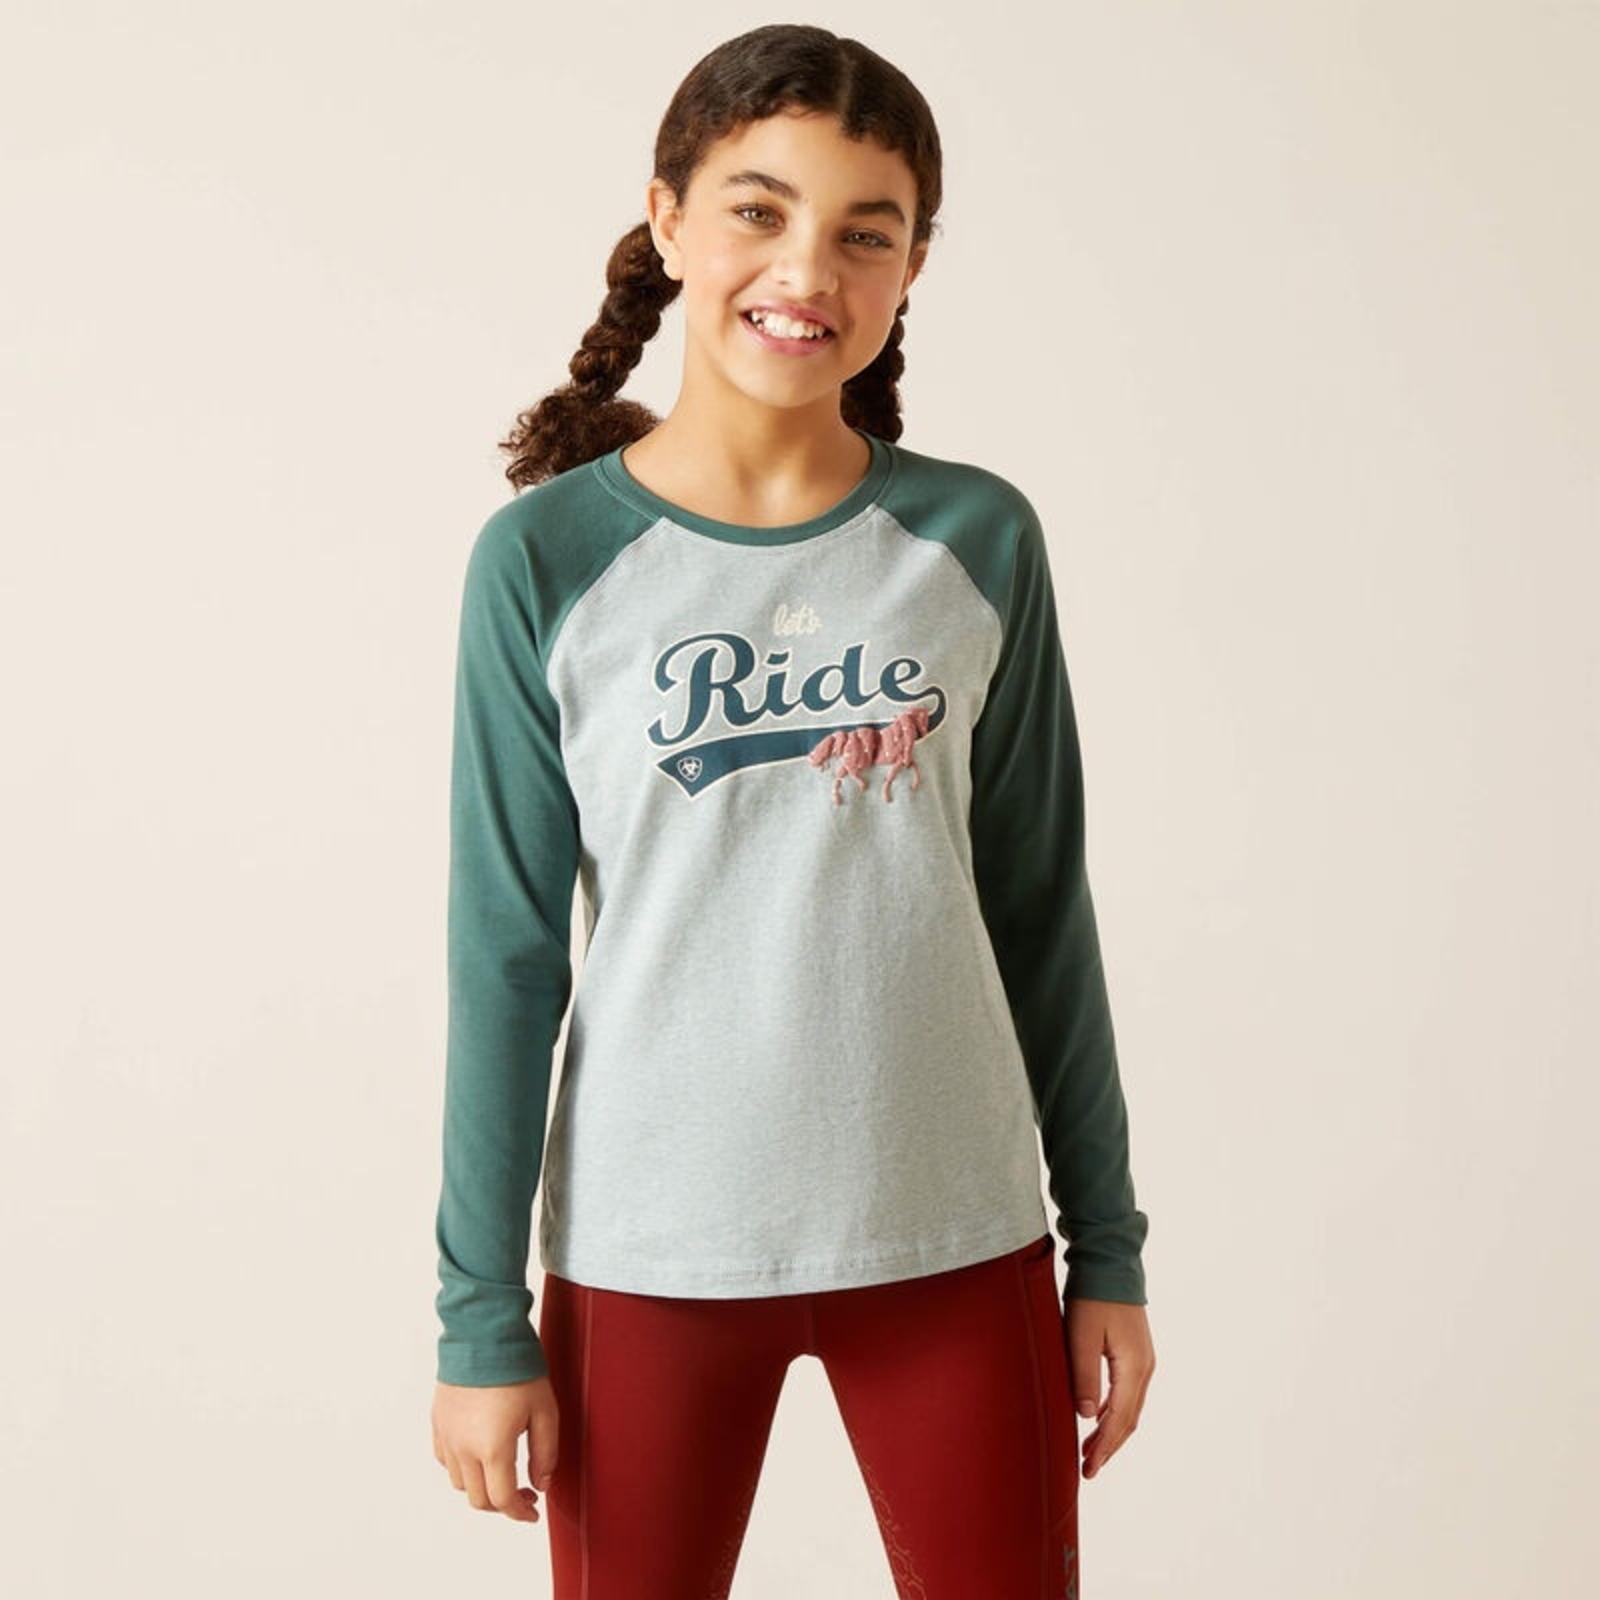 Ariat Girl's Let's Ride T-Shirt